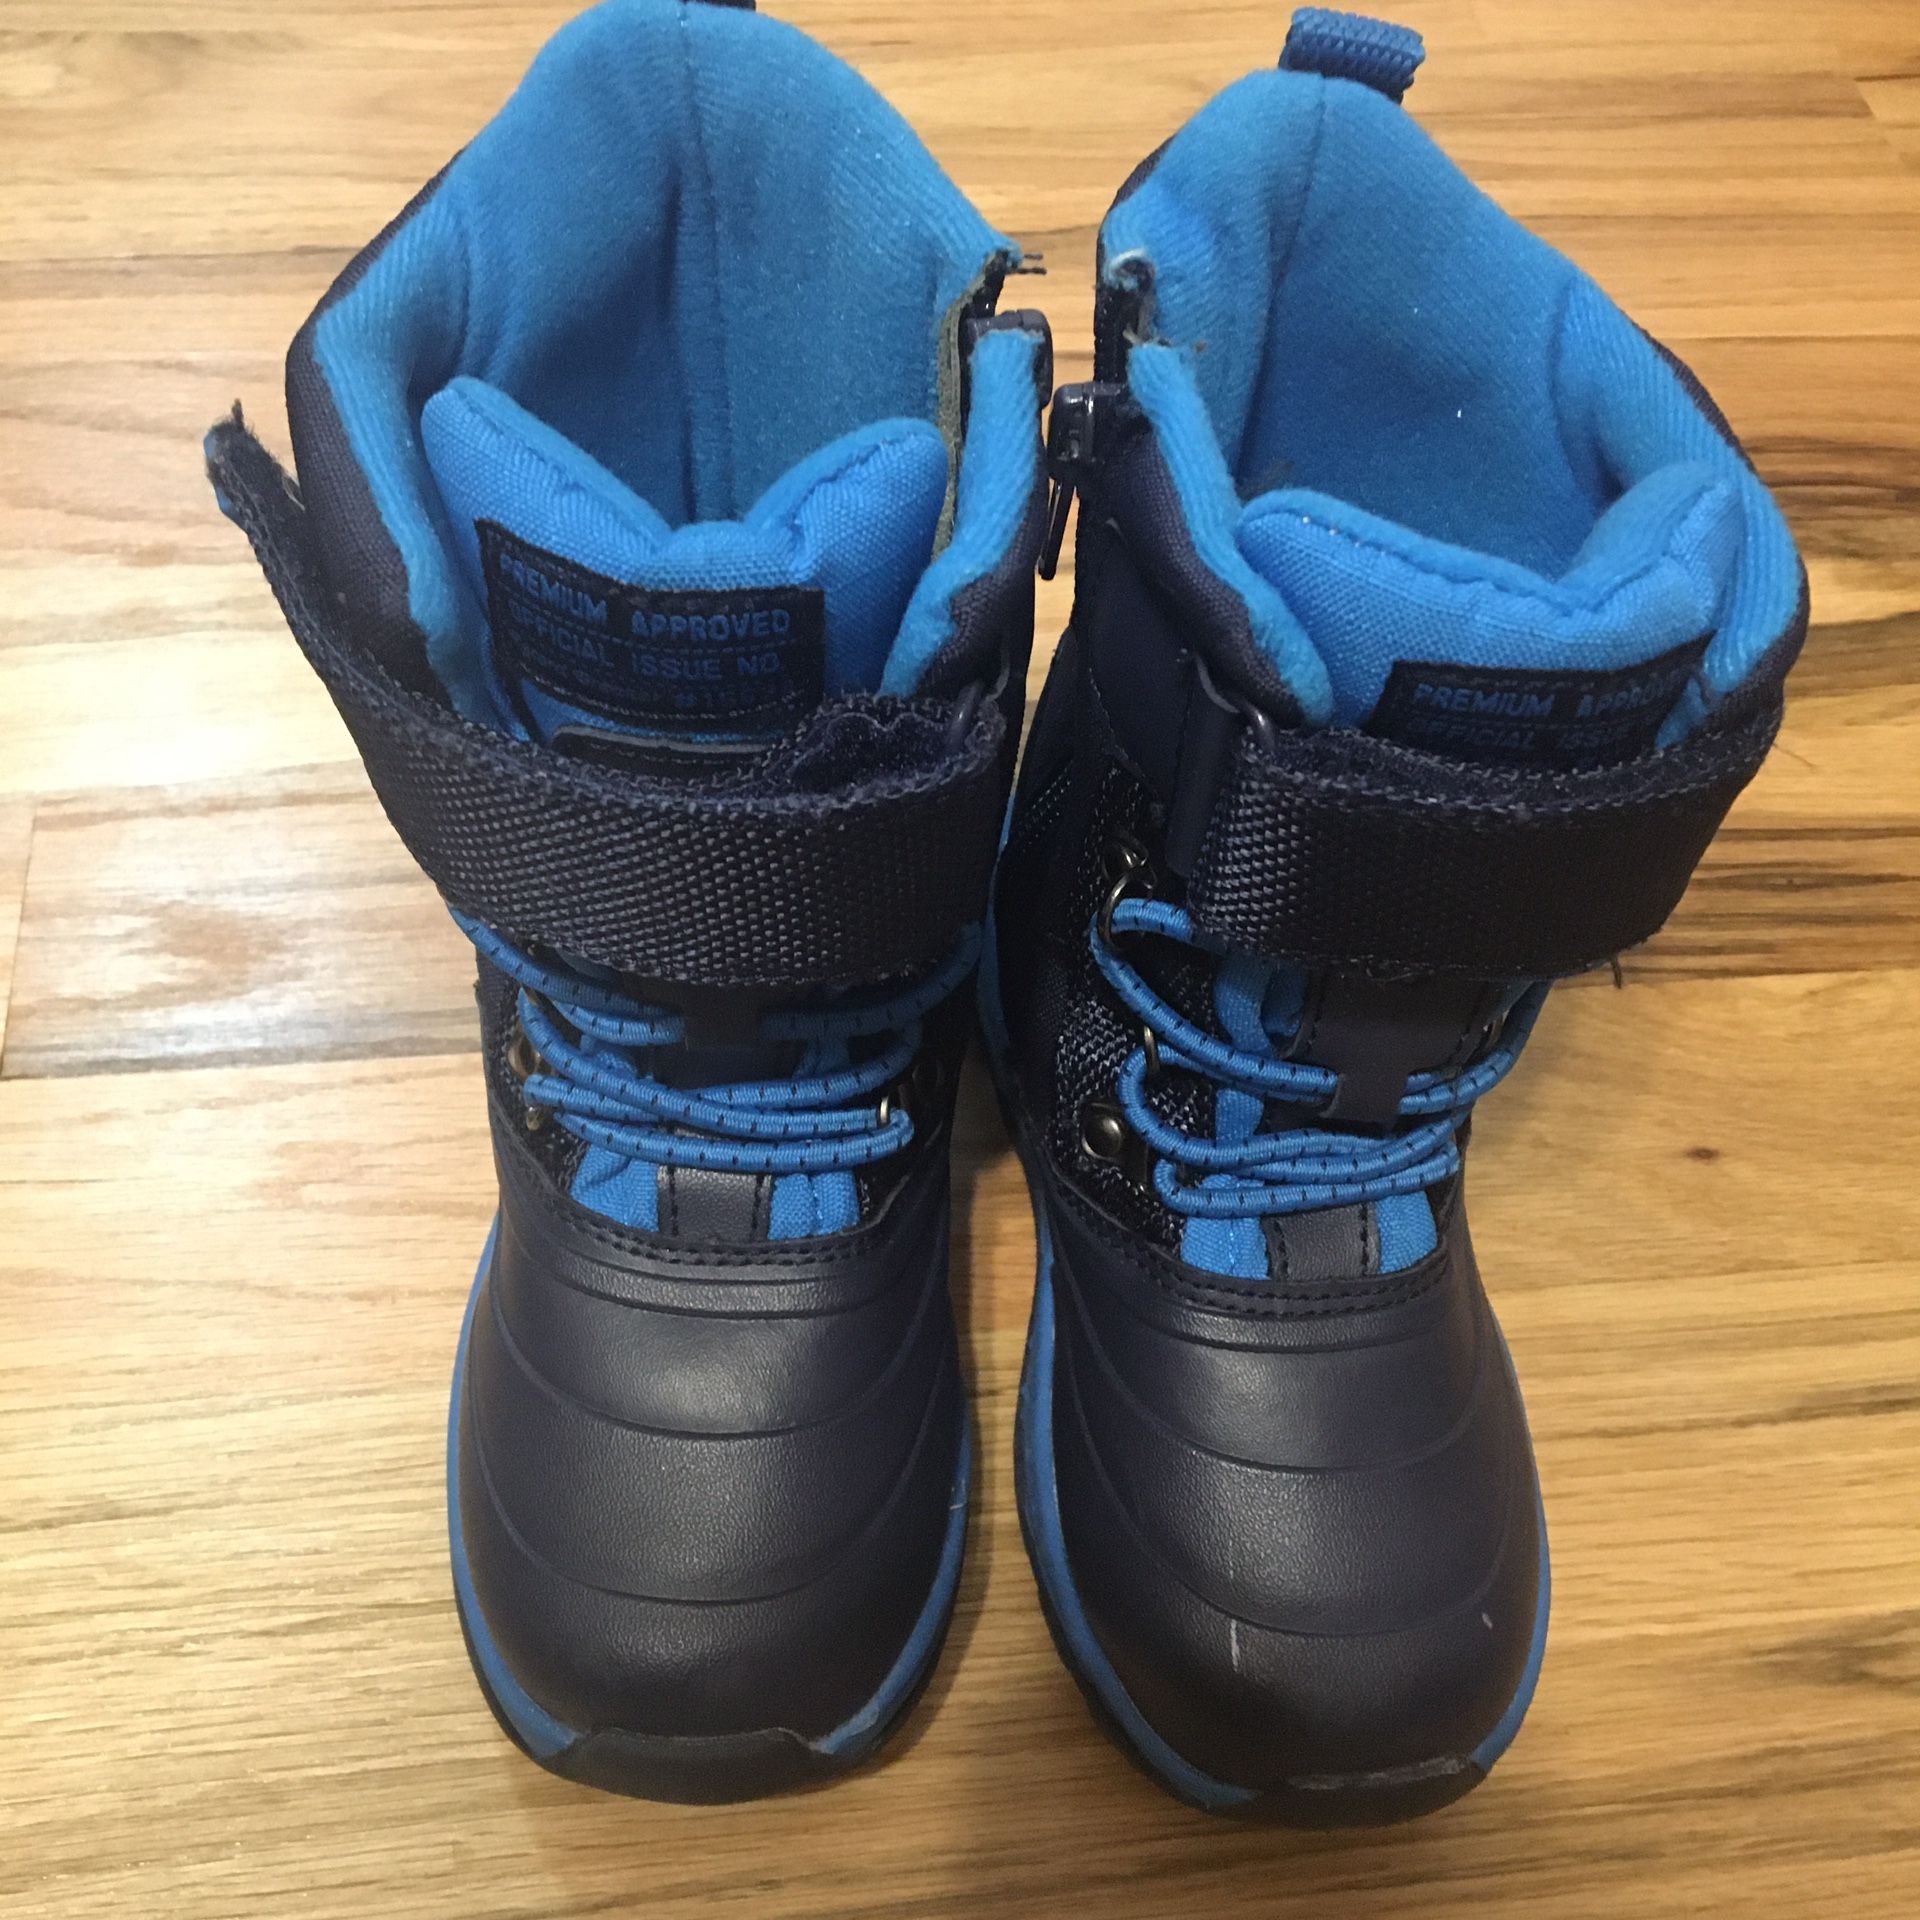 Toddler snow boots size 9